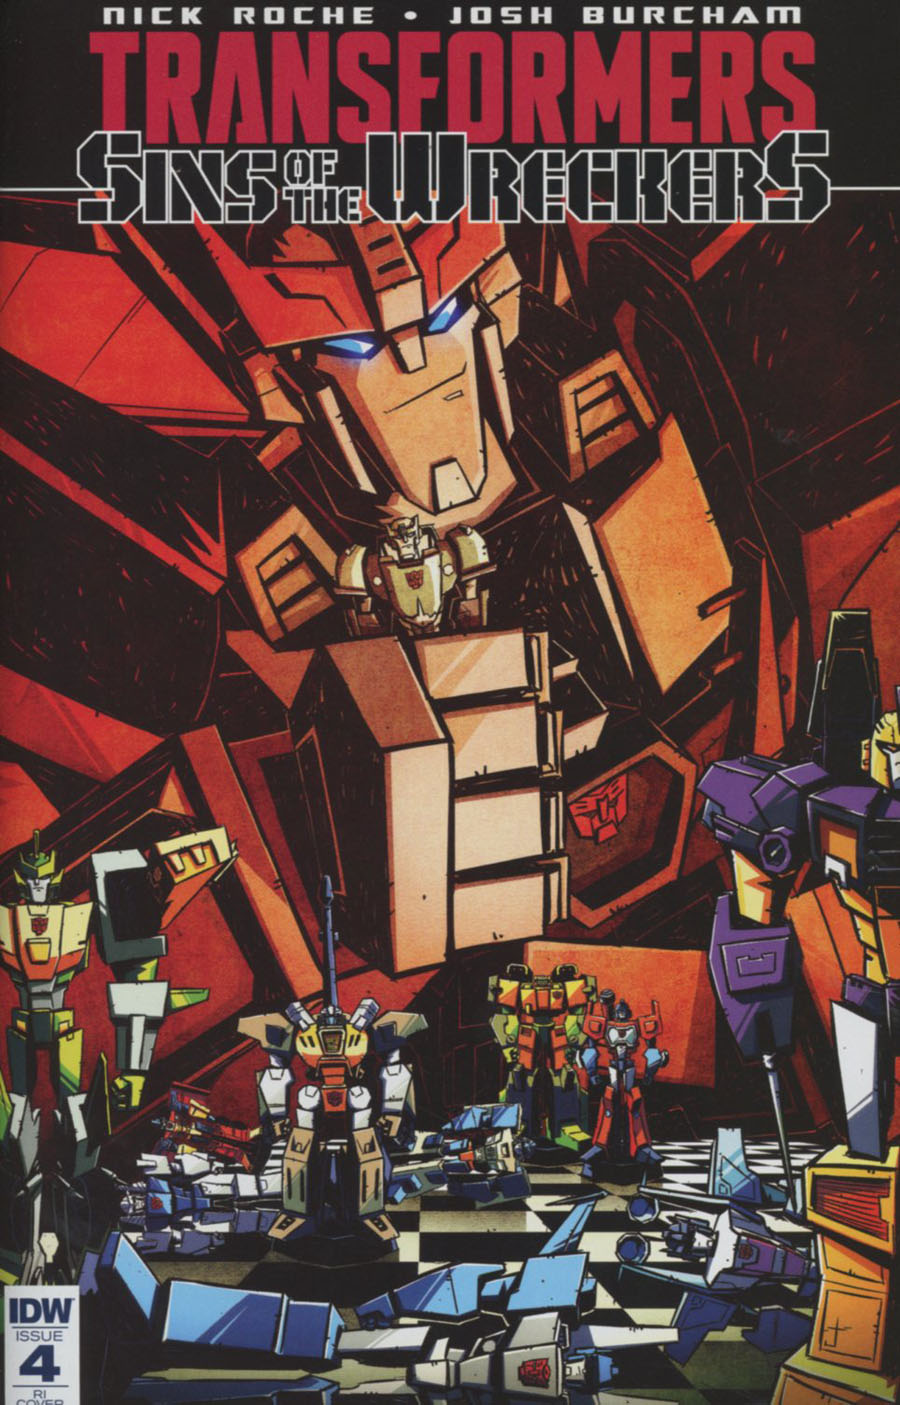 Transformers Sins Of The Wreckers #4 Cover C Incentive Josh Burcham Variant Cover